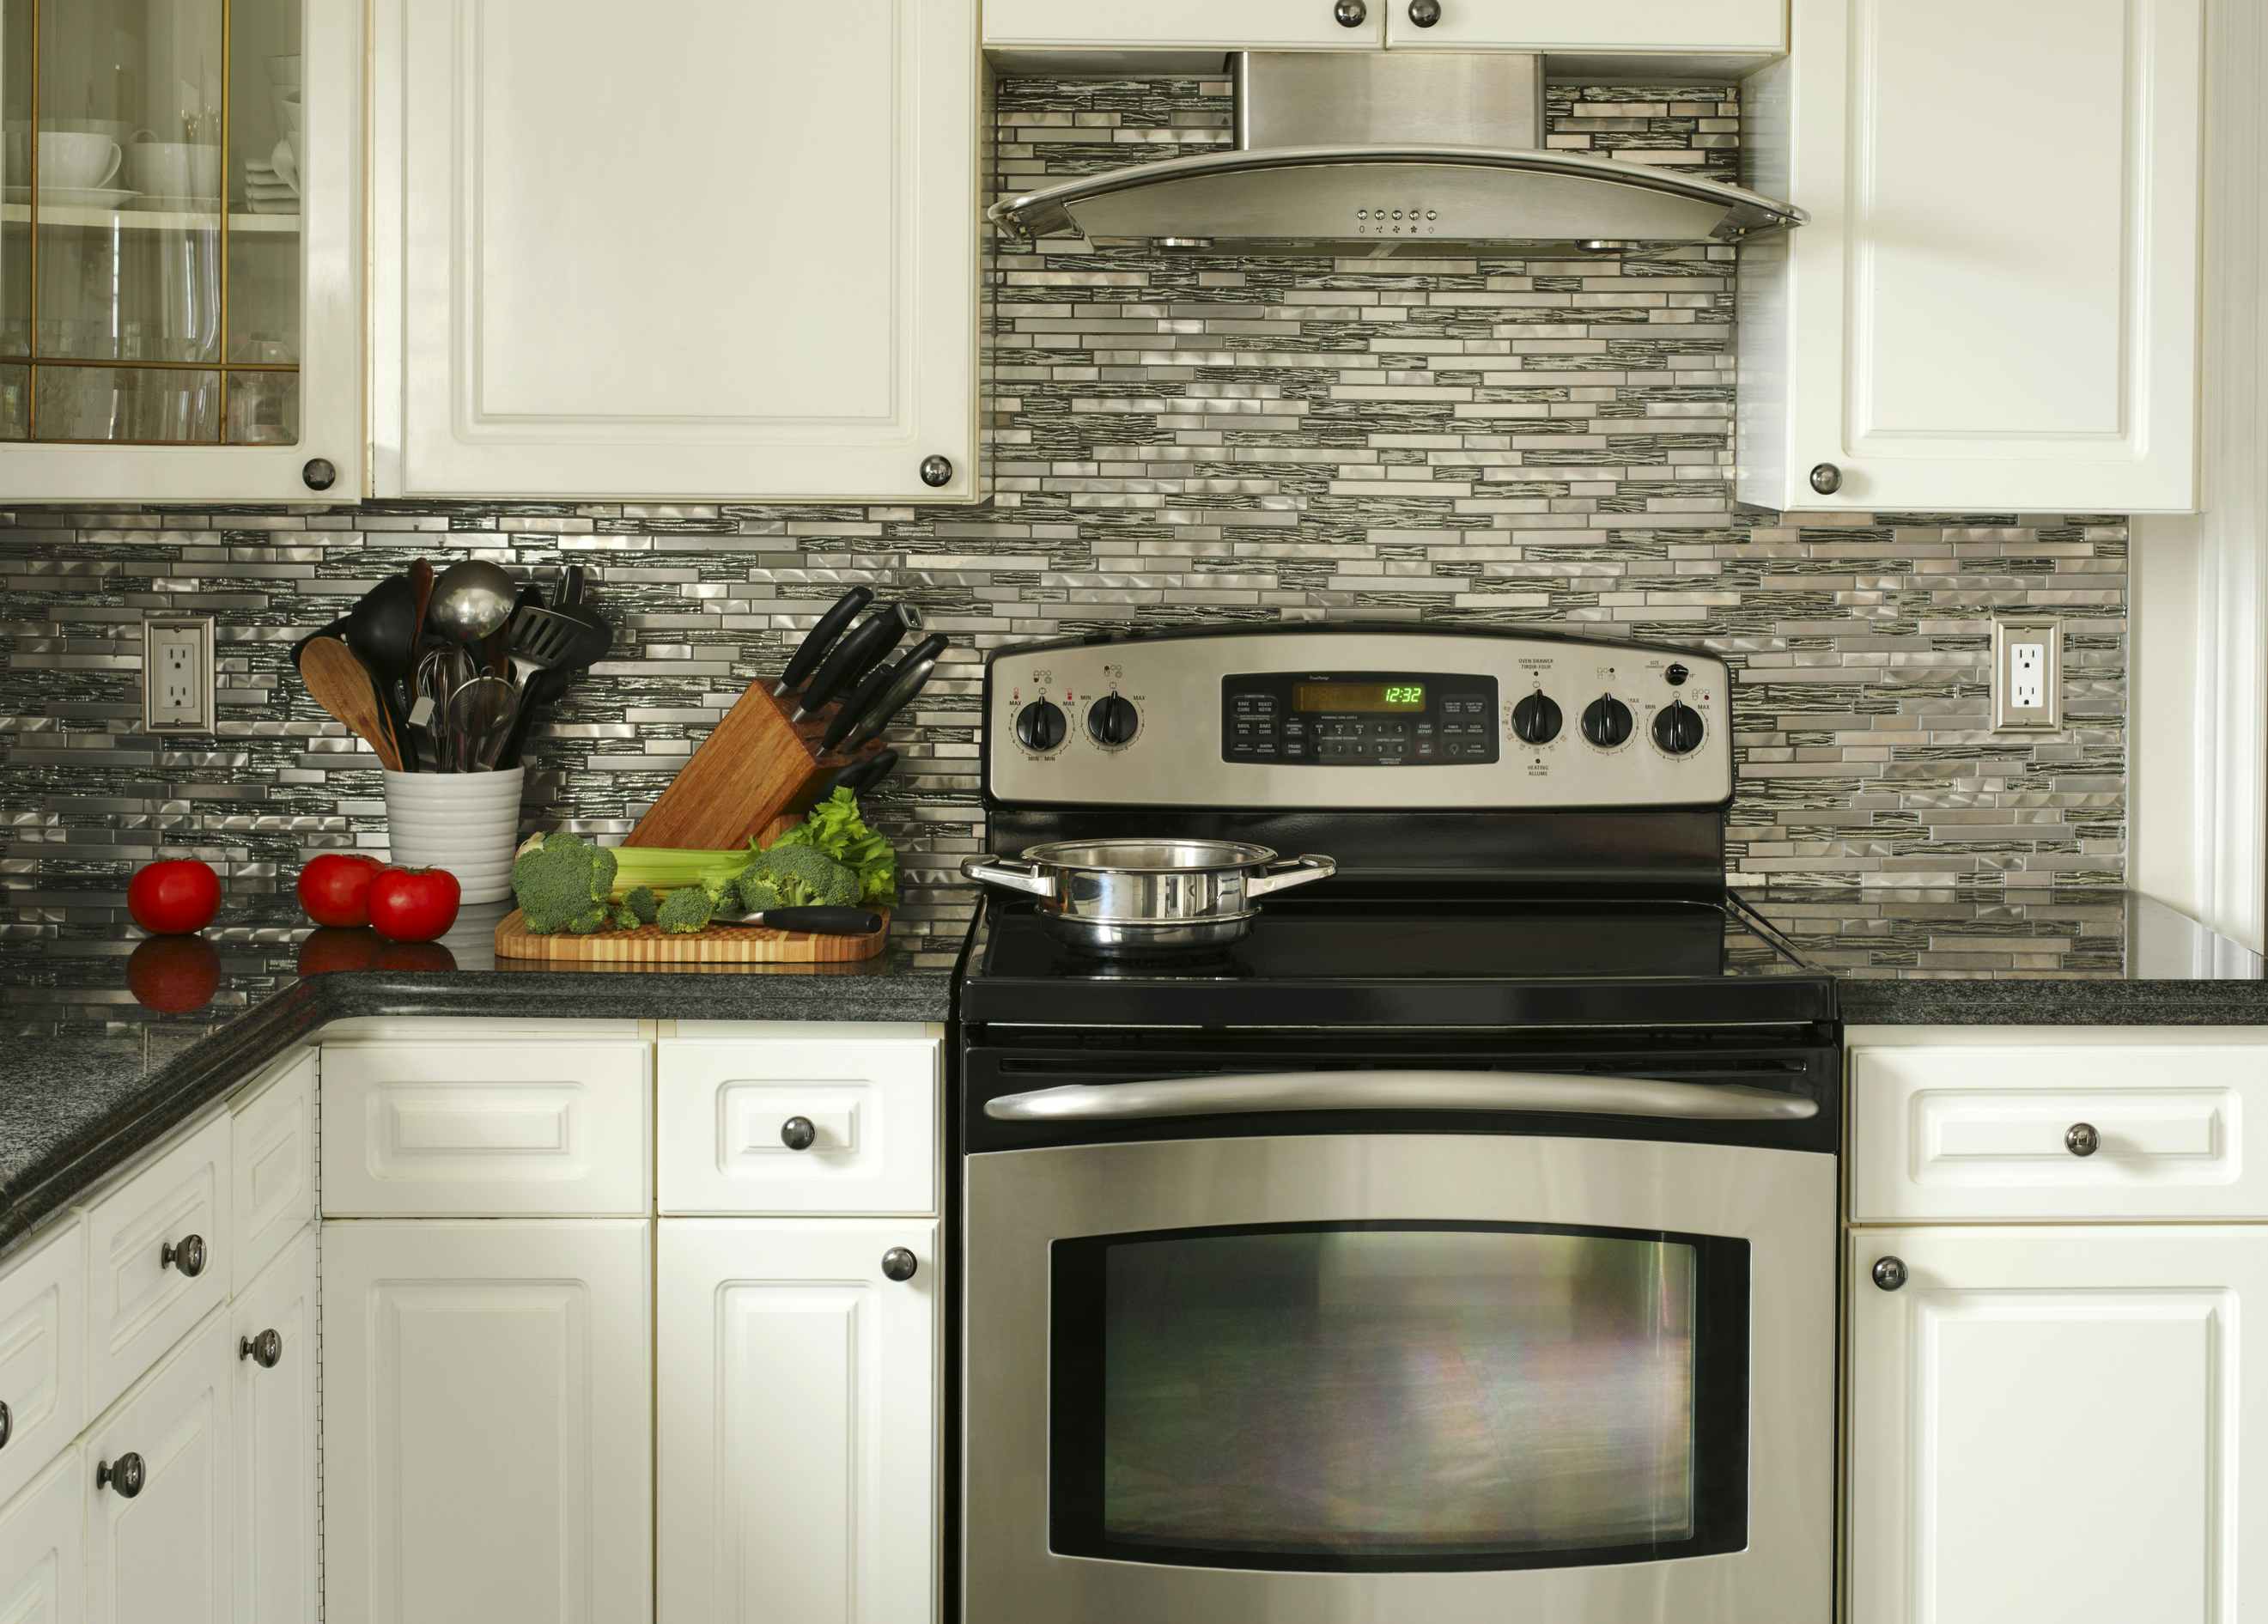 An electric stove with four burners positioned in the middle of the kitchen.